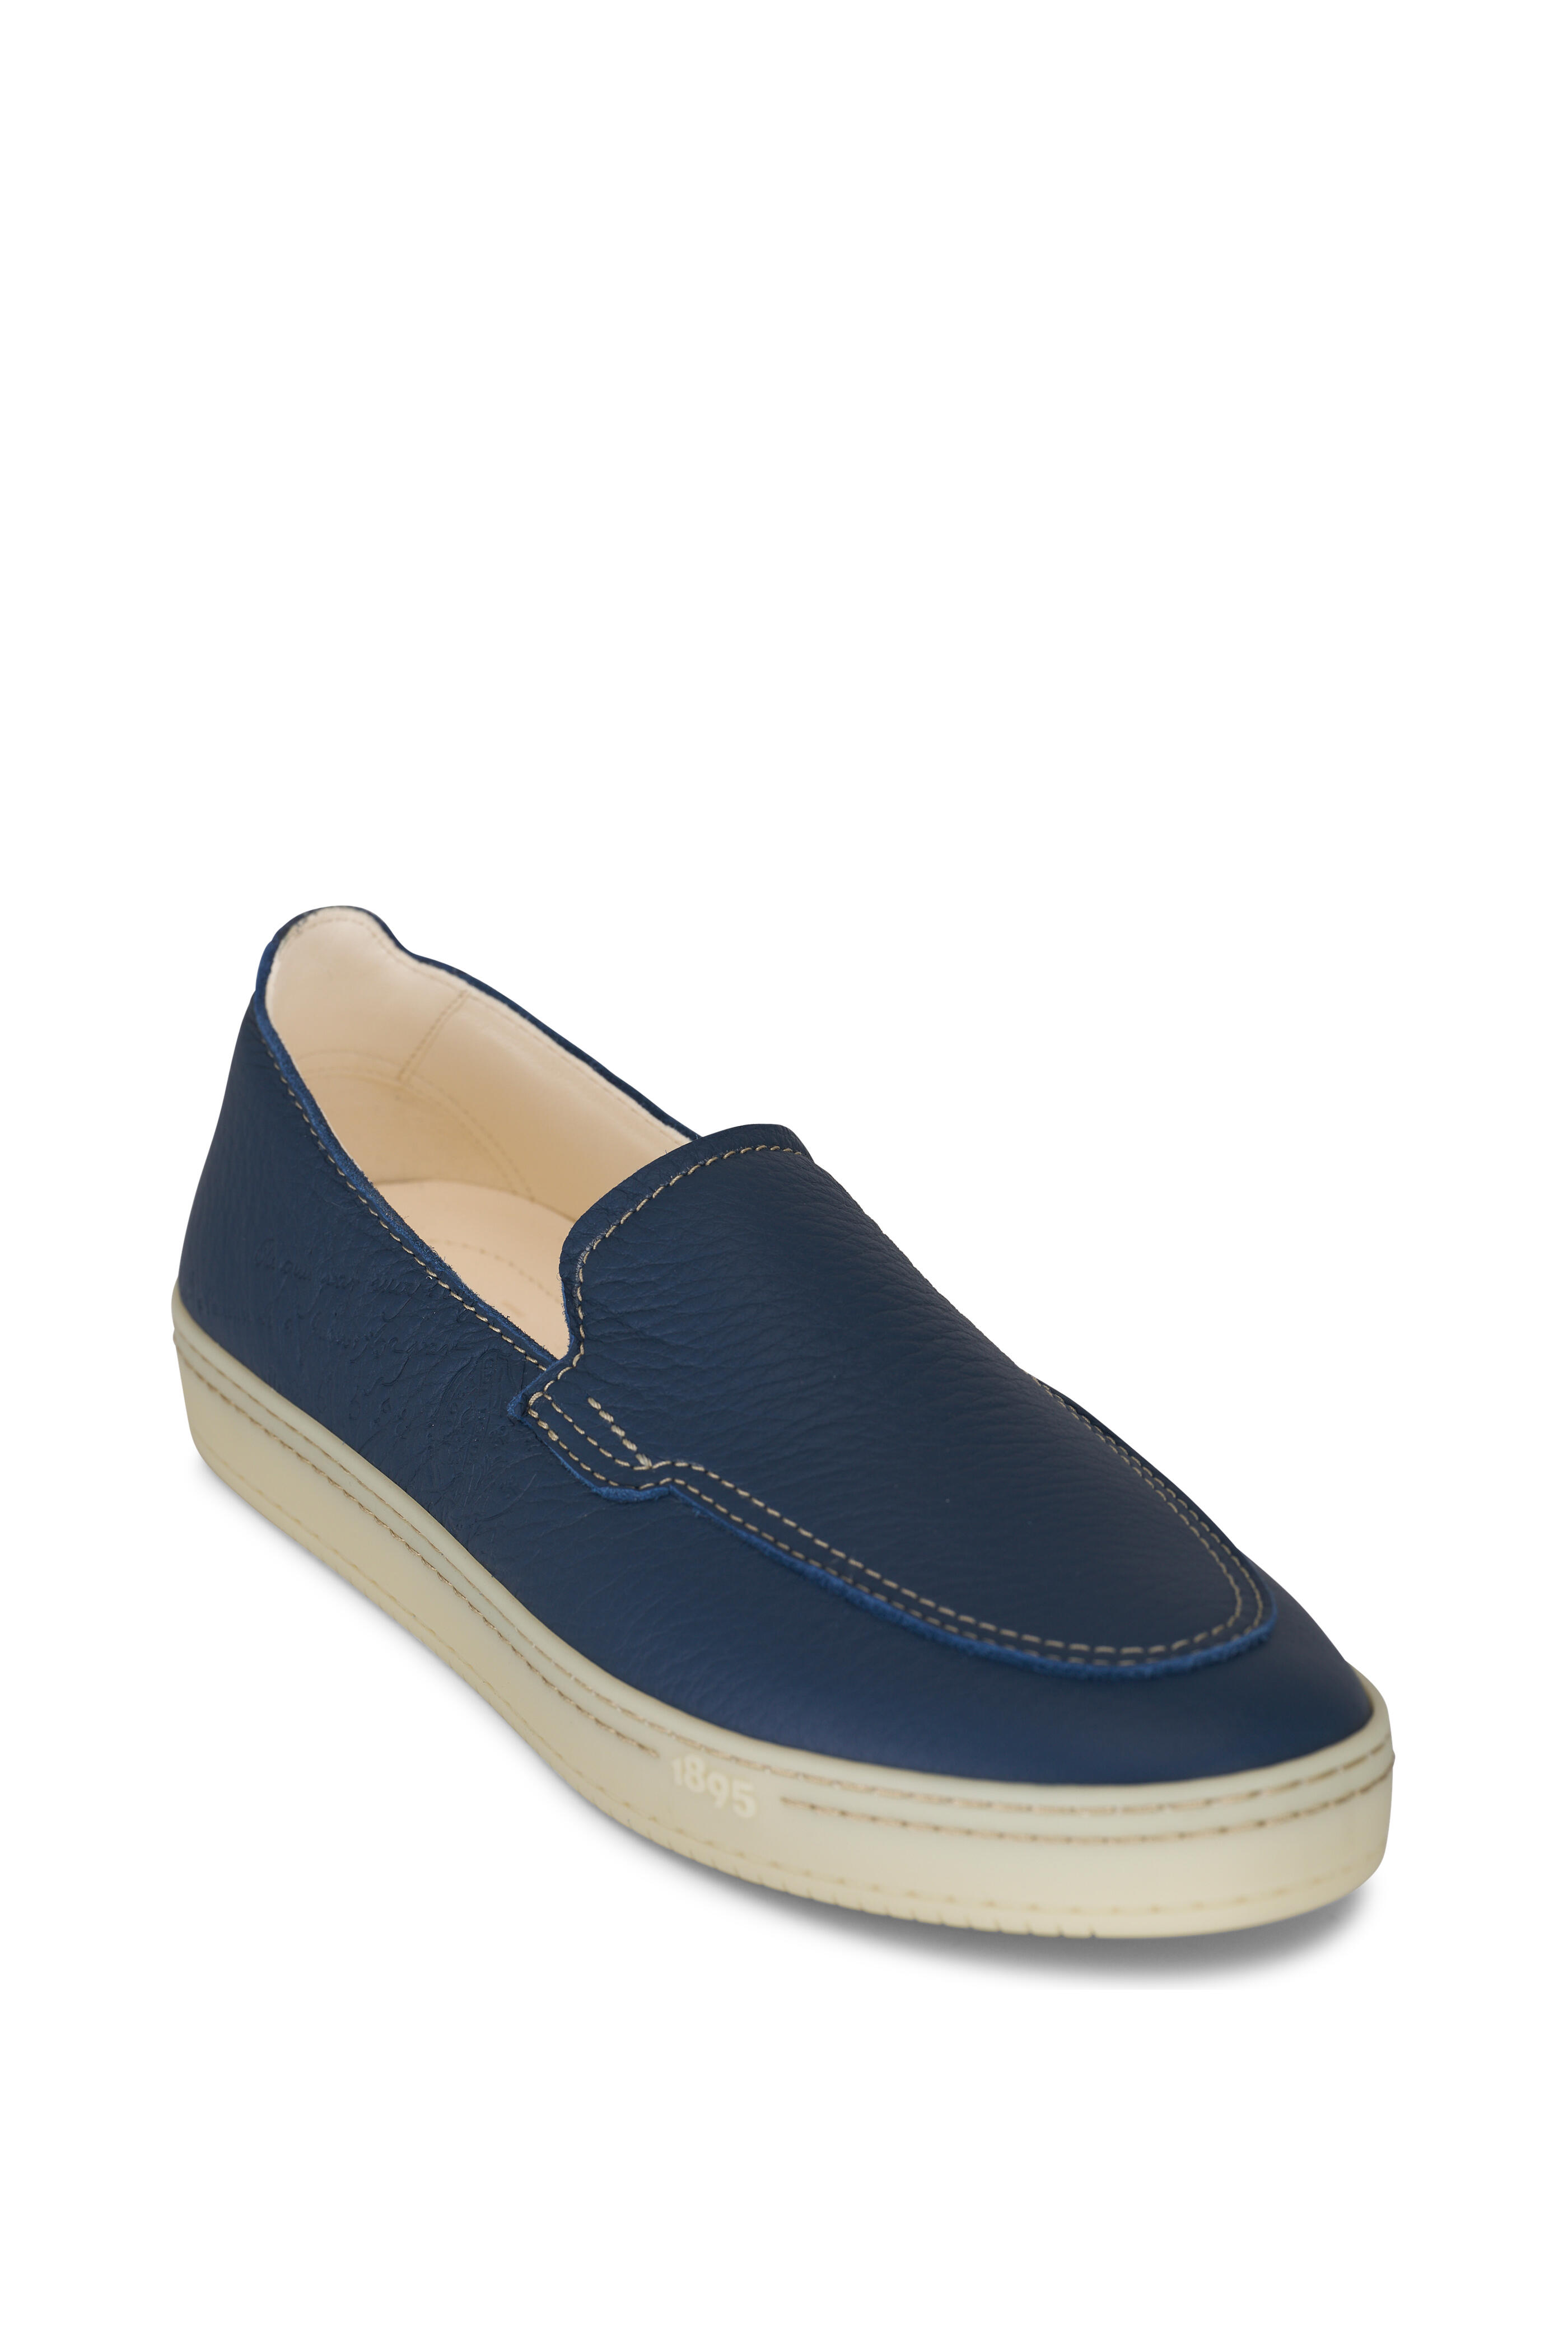 Berluti - Scritto Blue Leather Loafer | Mitchell Stores